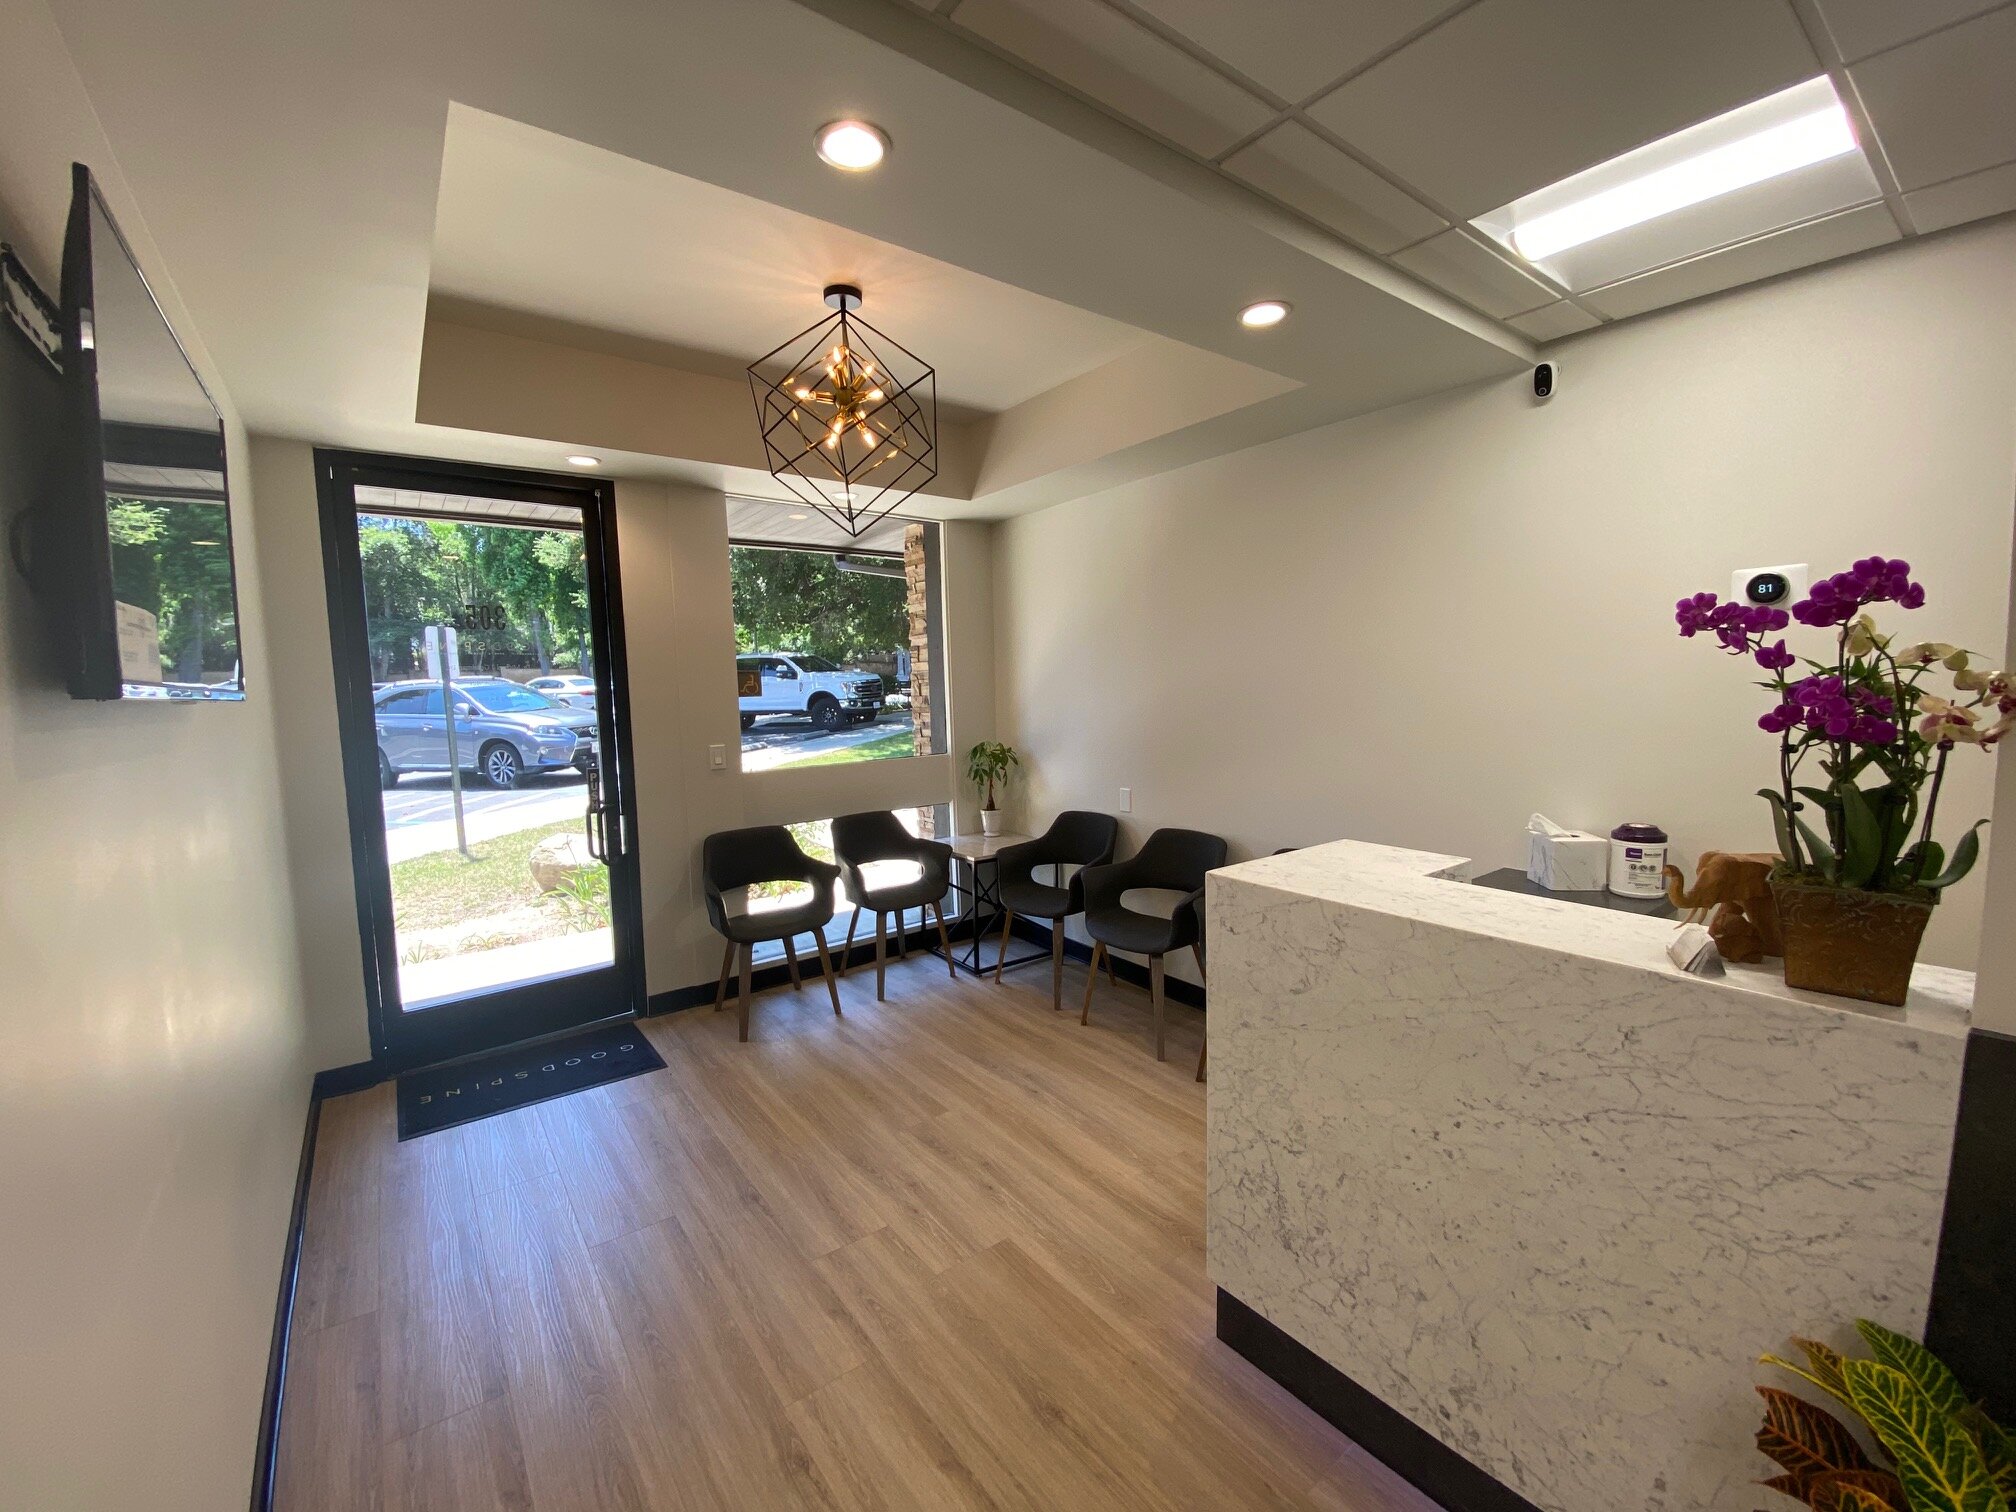 Conejo Medical Office for Lease Thousand Oaks Rent Office Doctors Private Practice Medicine Health Physician Space MD Eric Nishimoto 4.jpg